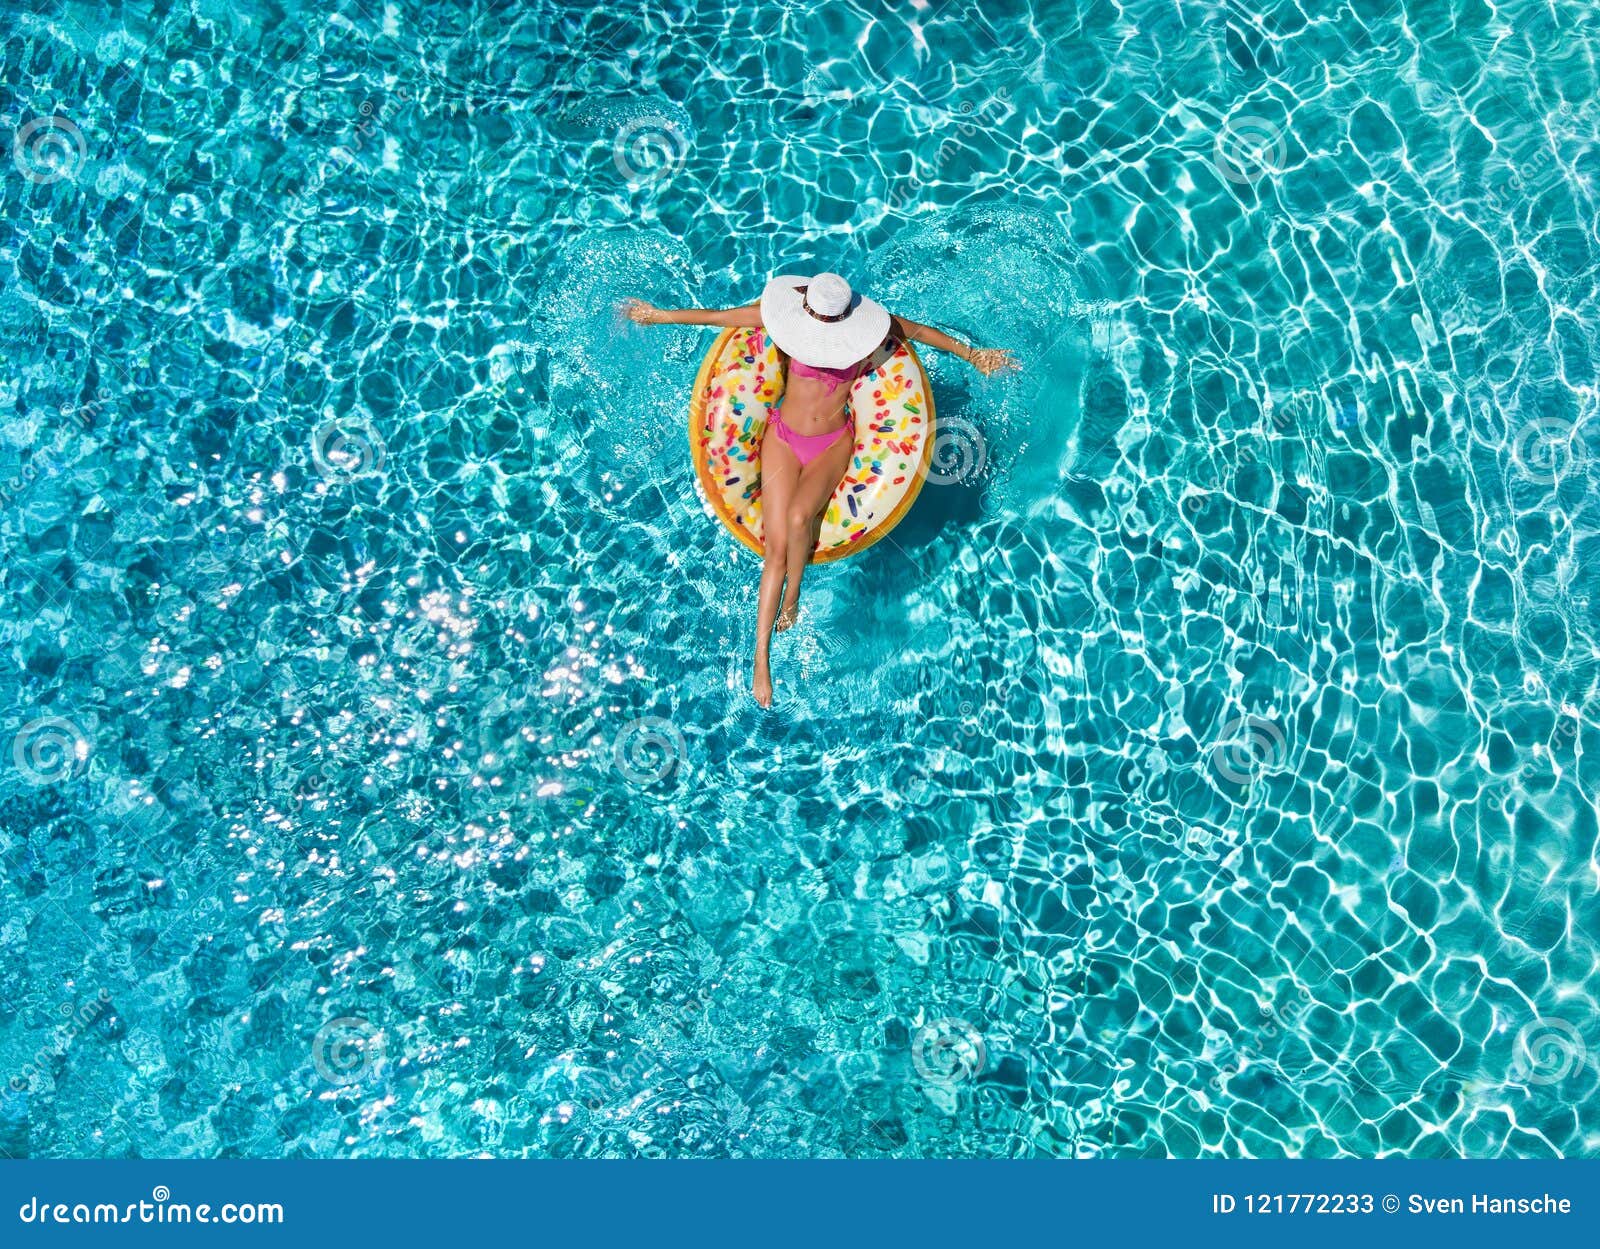 woman relaxes on a donut d float over blue, sparkling pool water